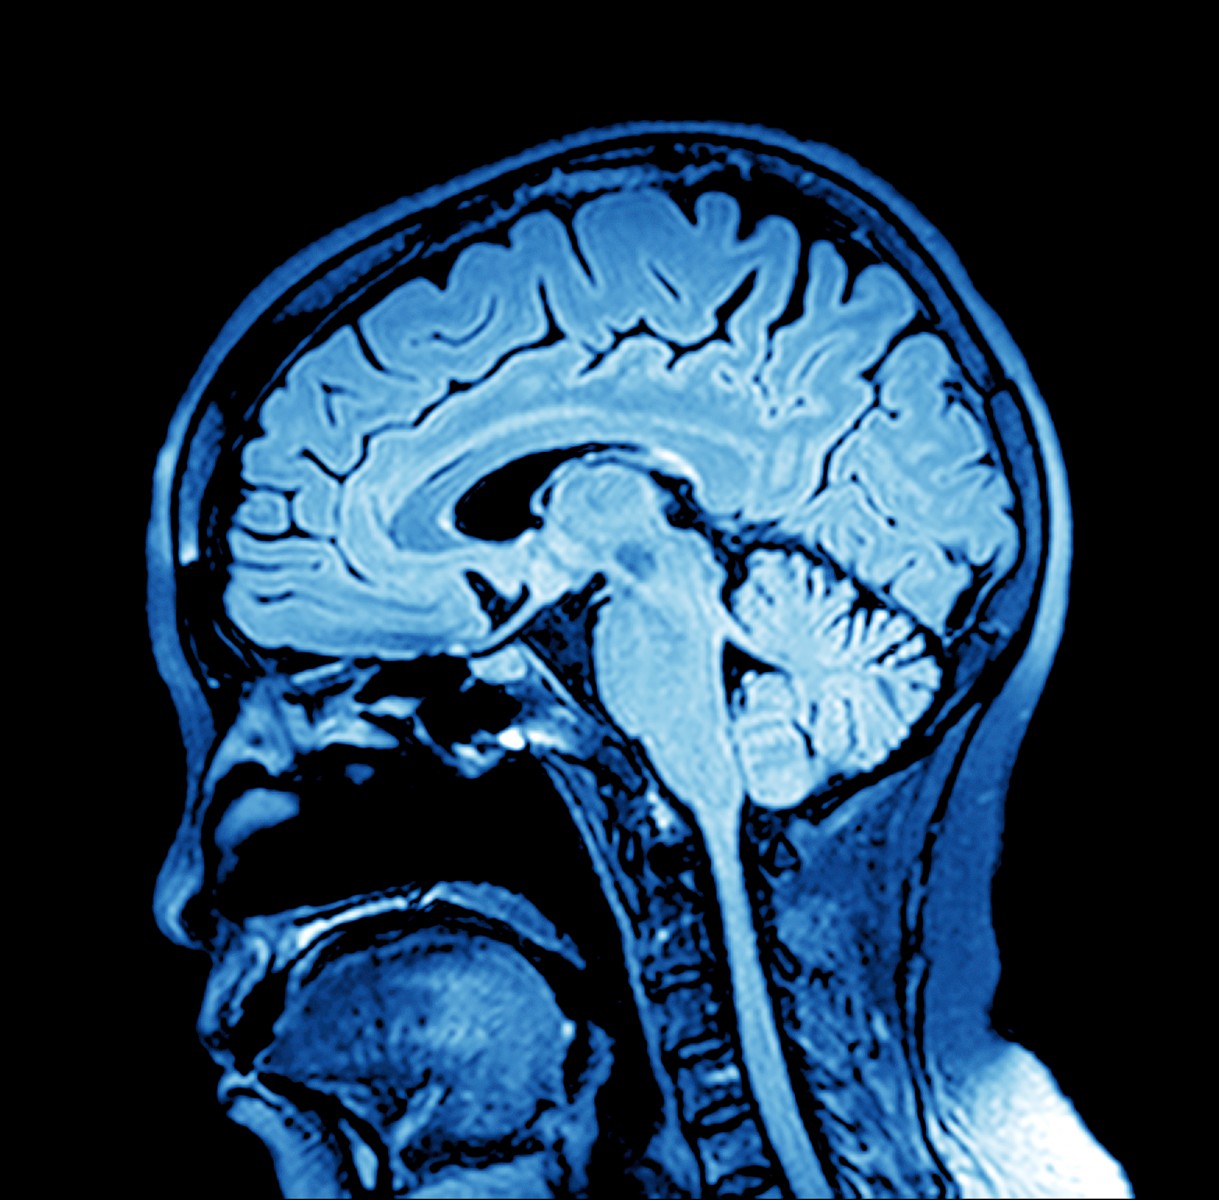 Whole Brain Radiation Therapy Poses Threat to Cognitive Function